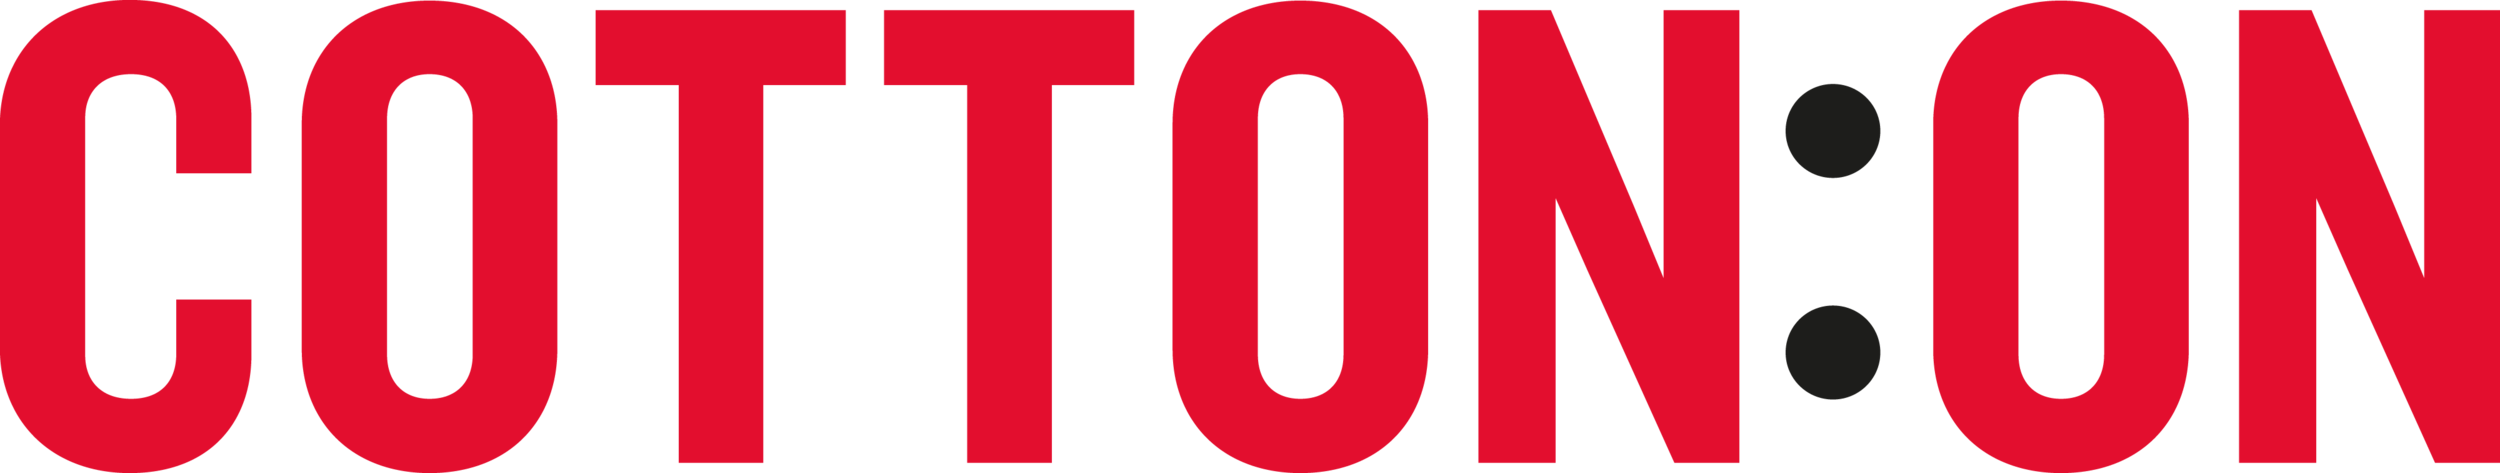 Cotton_On_logo.png